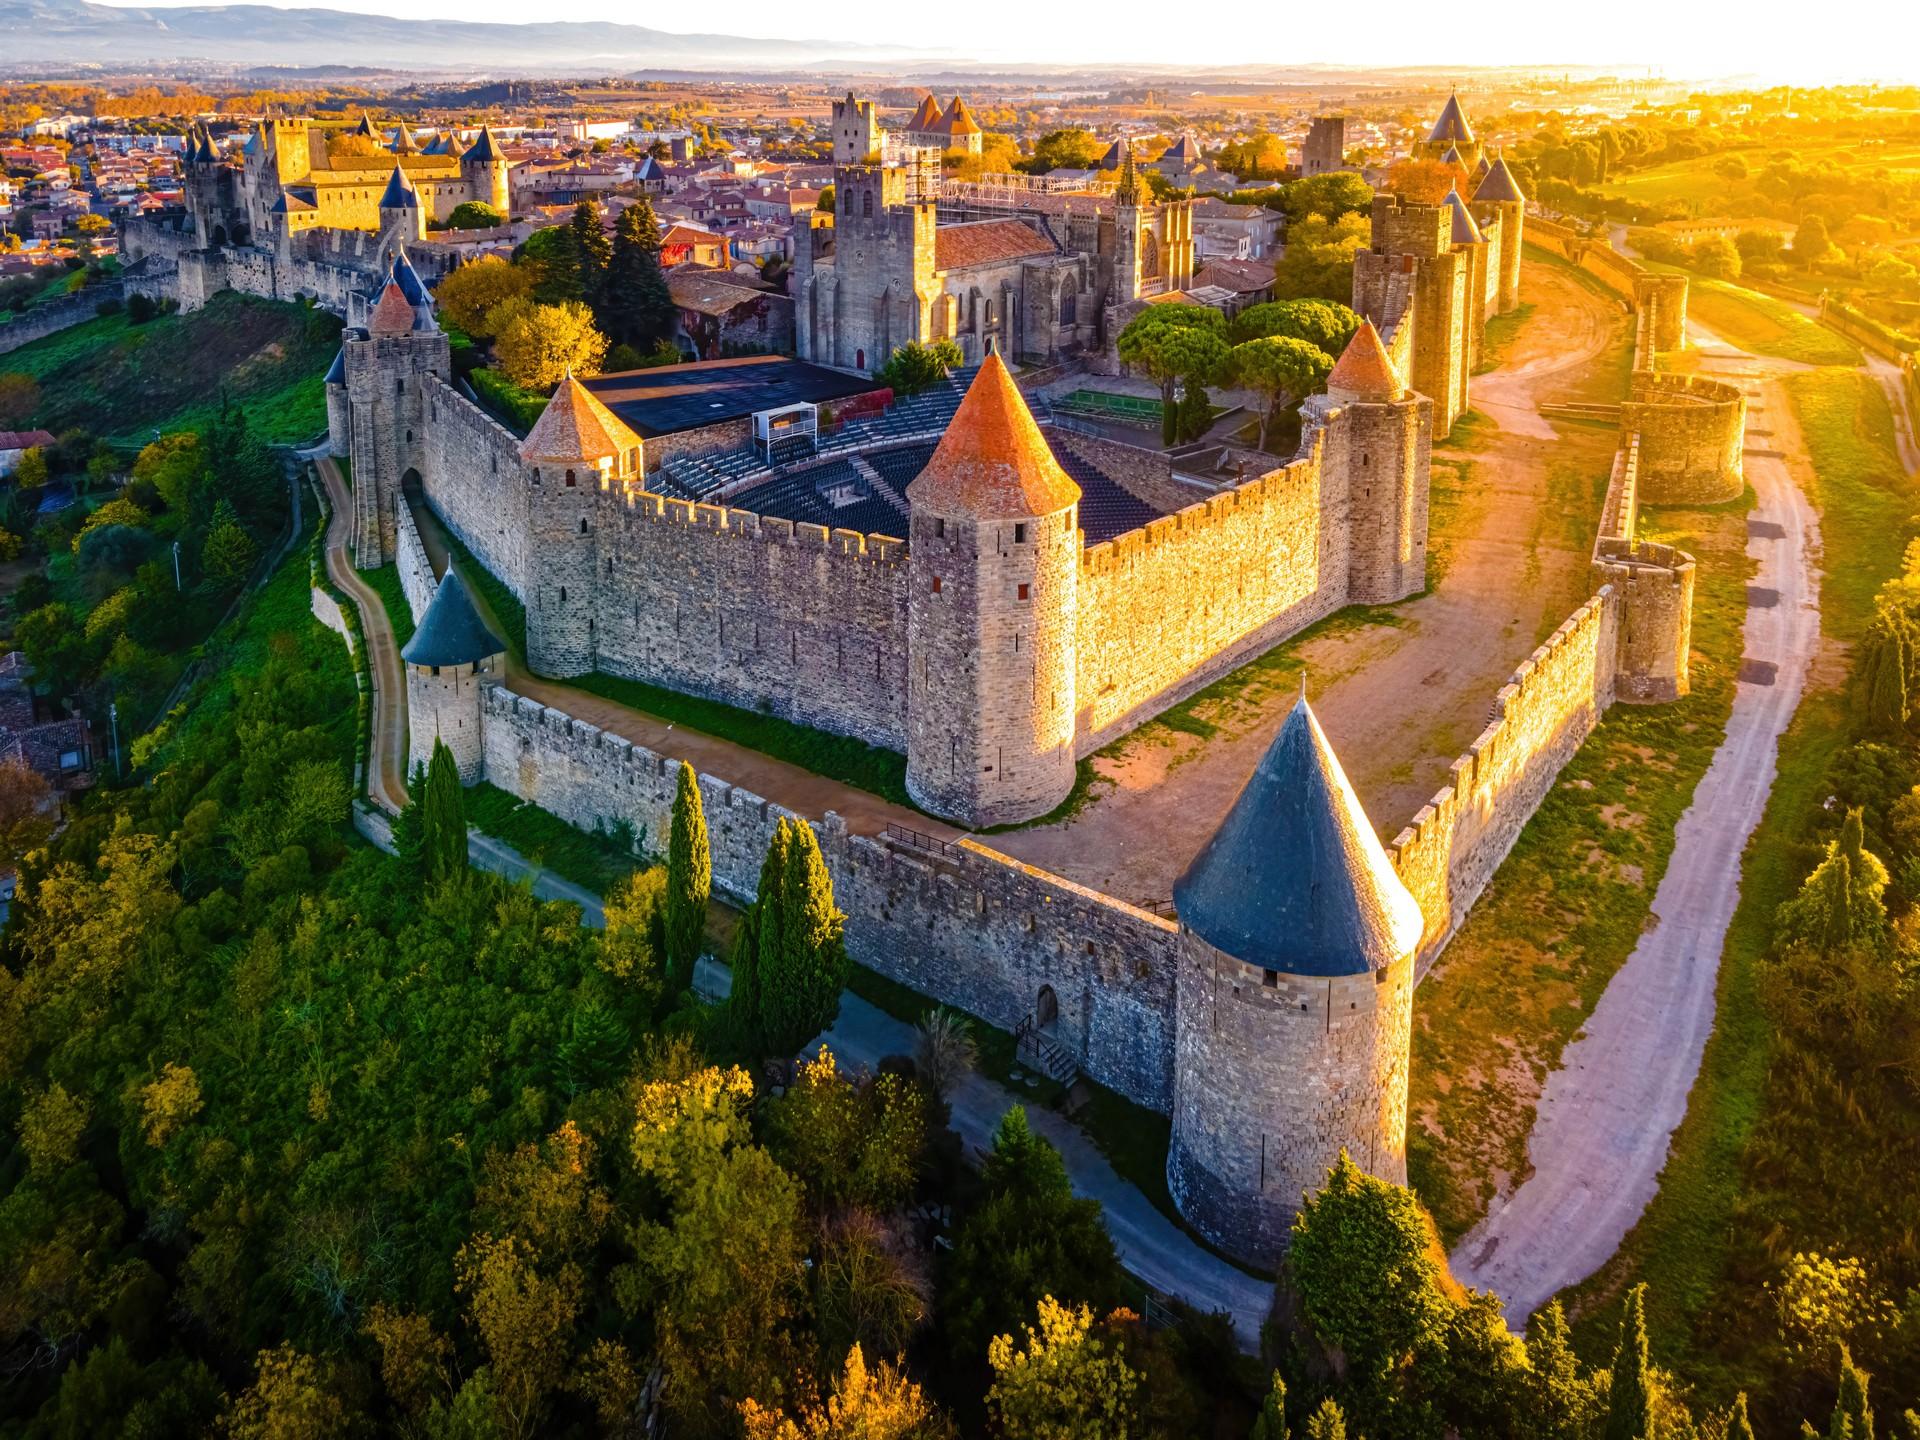 Aerial view of architecture in Carcassonne